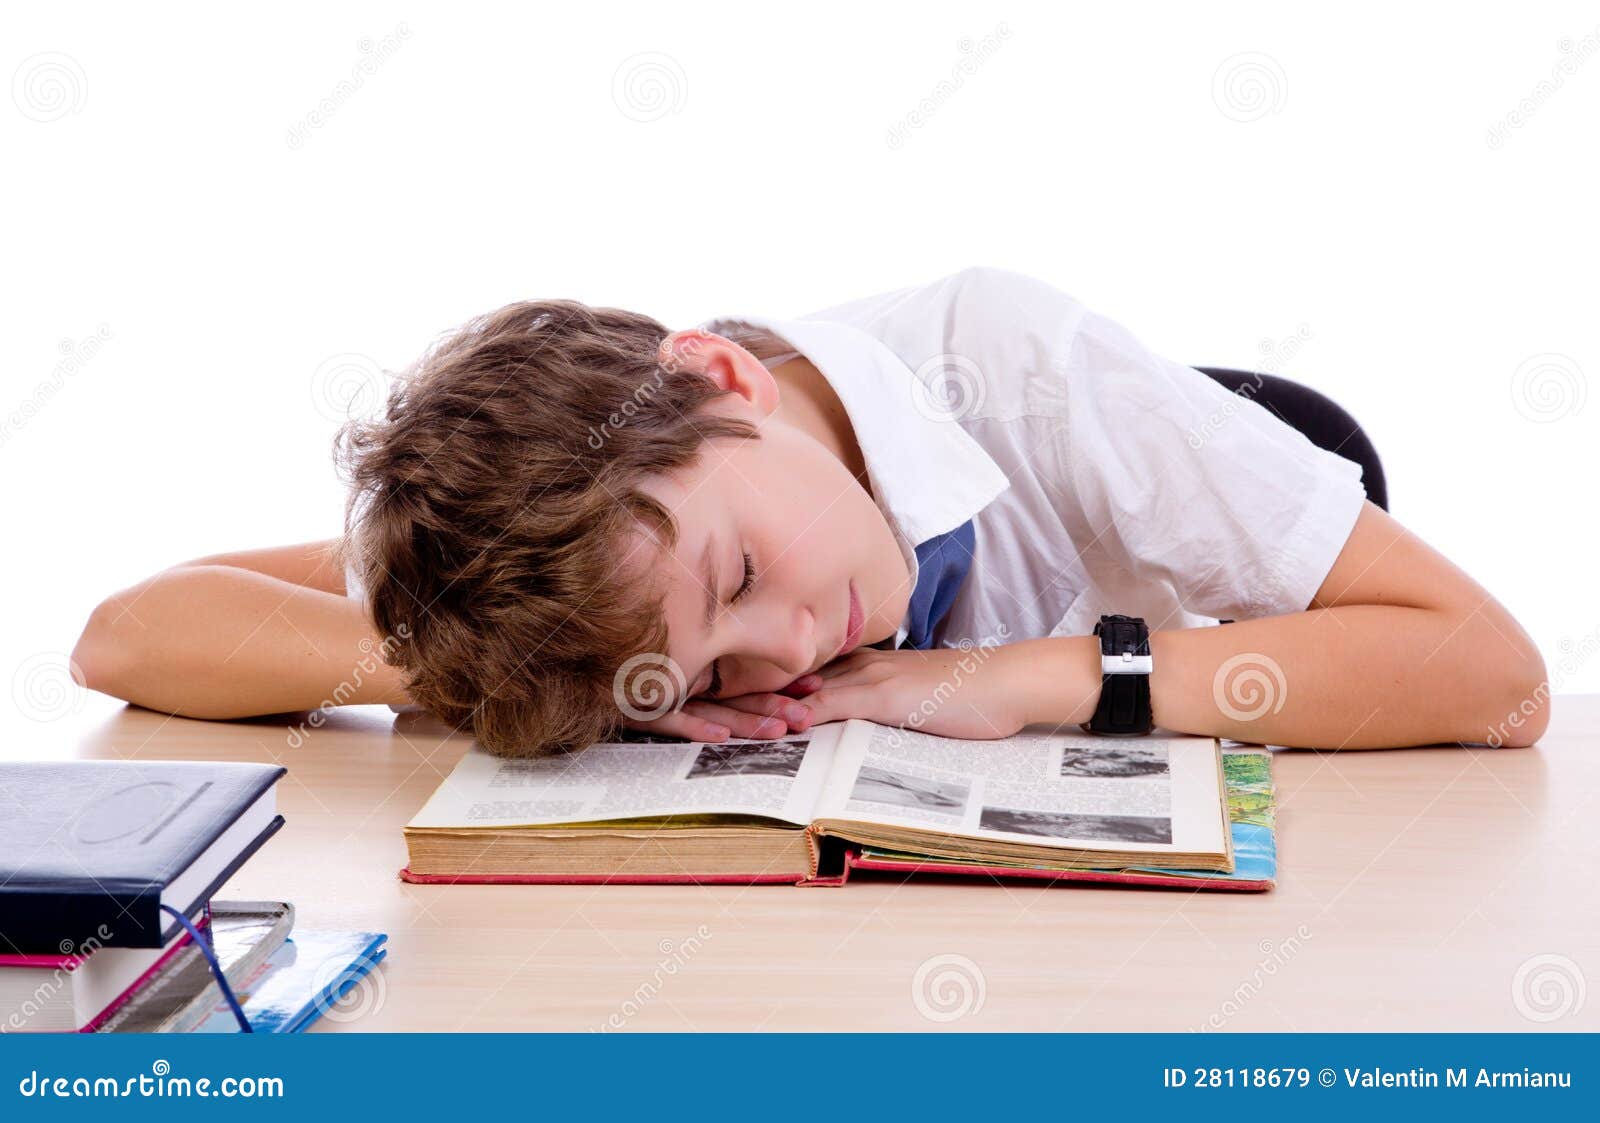 tired student